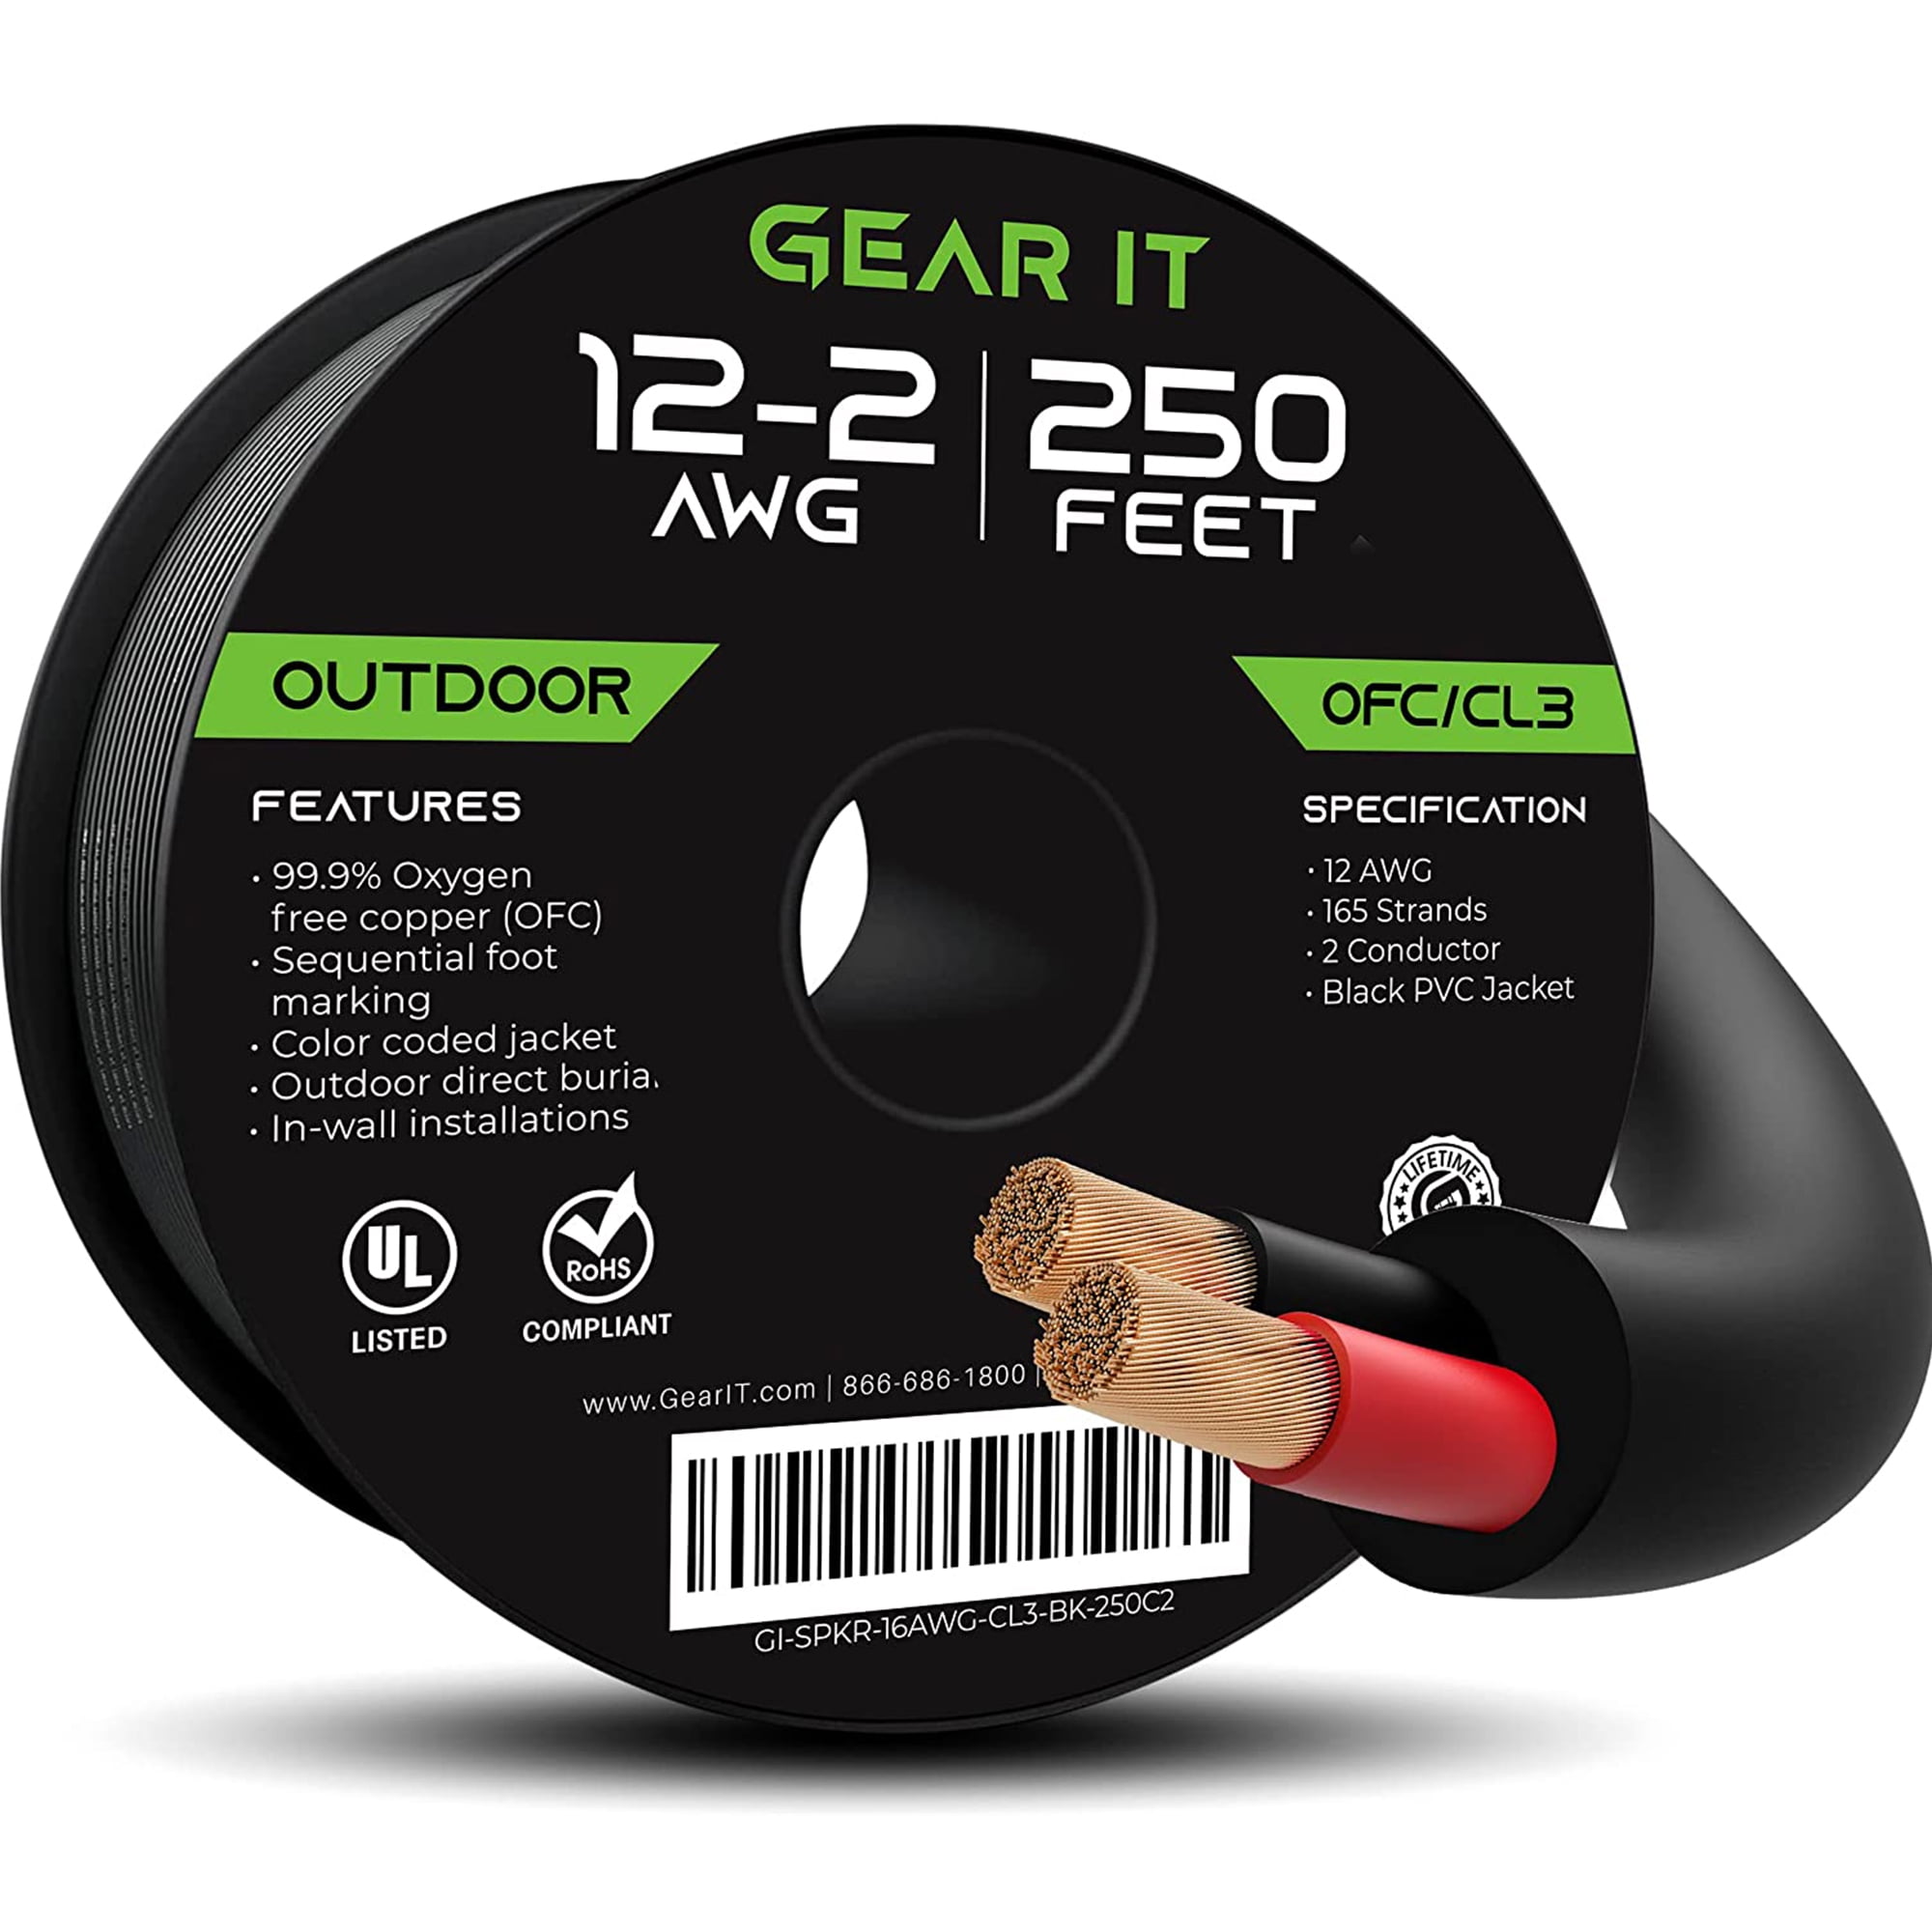 GearIT 14/2 Speaker Wire (250 Feet) 14AWG Gauge - Outdoor Direct Burial in  Ground/in Wall / CL3 CL2 Rated / 2 Conductors - OFC Oxygen-Free Copper